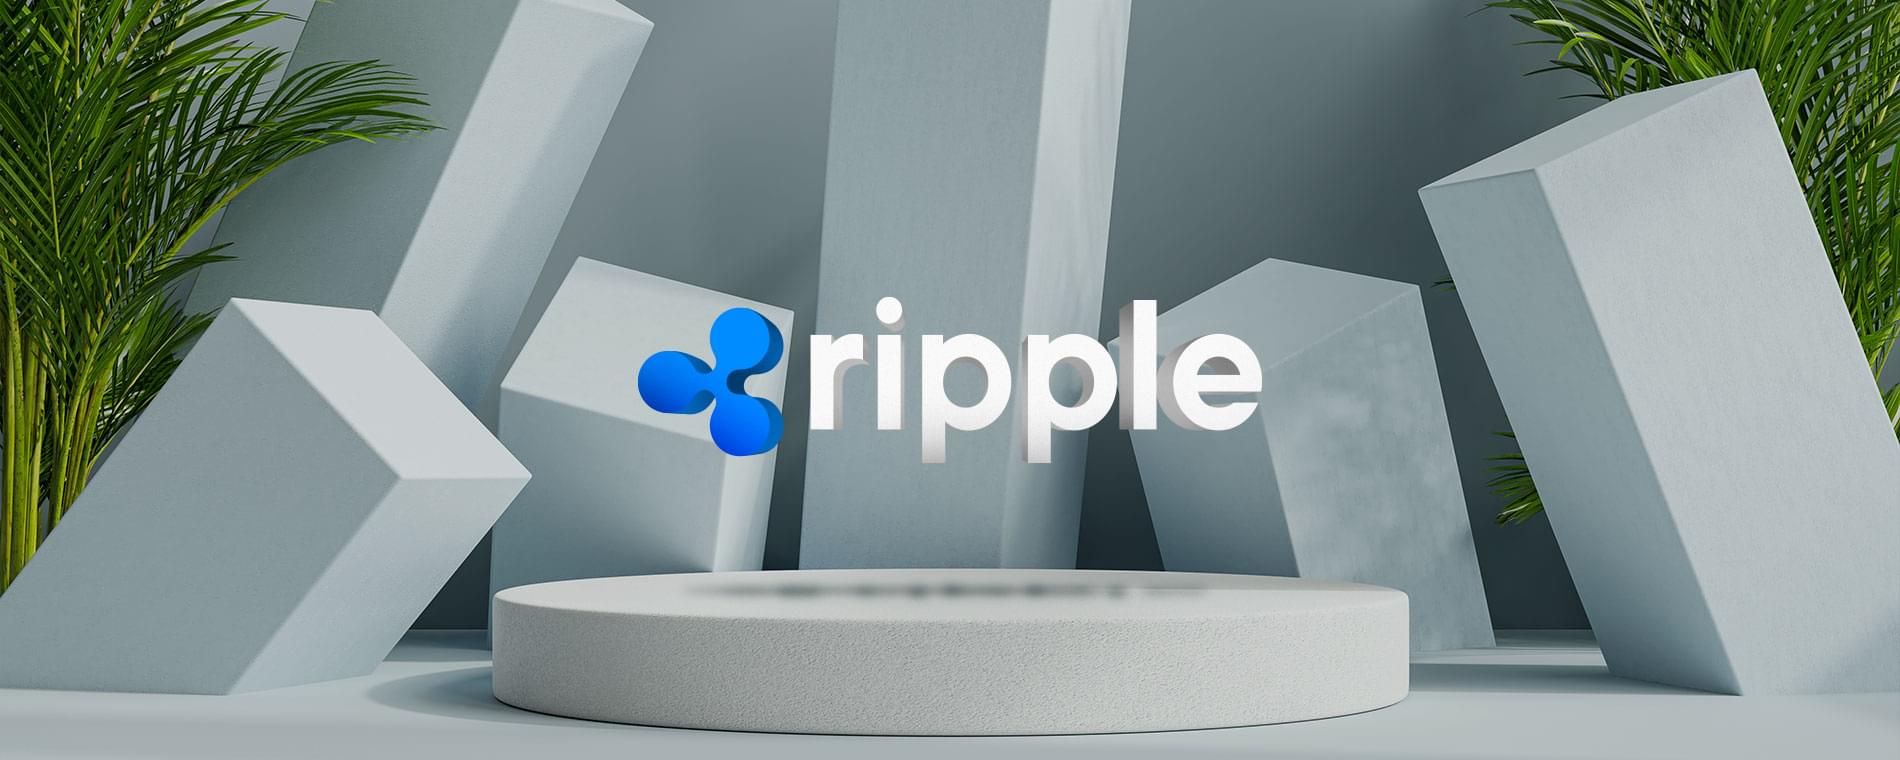 Ripple on-demand liquidity - how does it work?